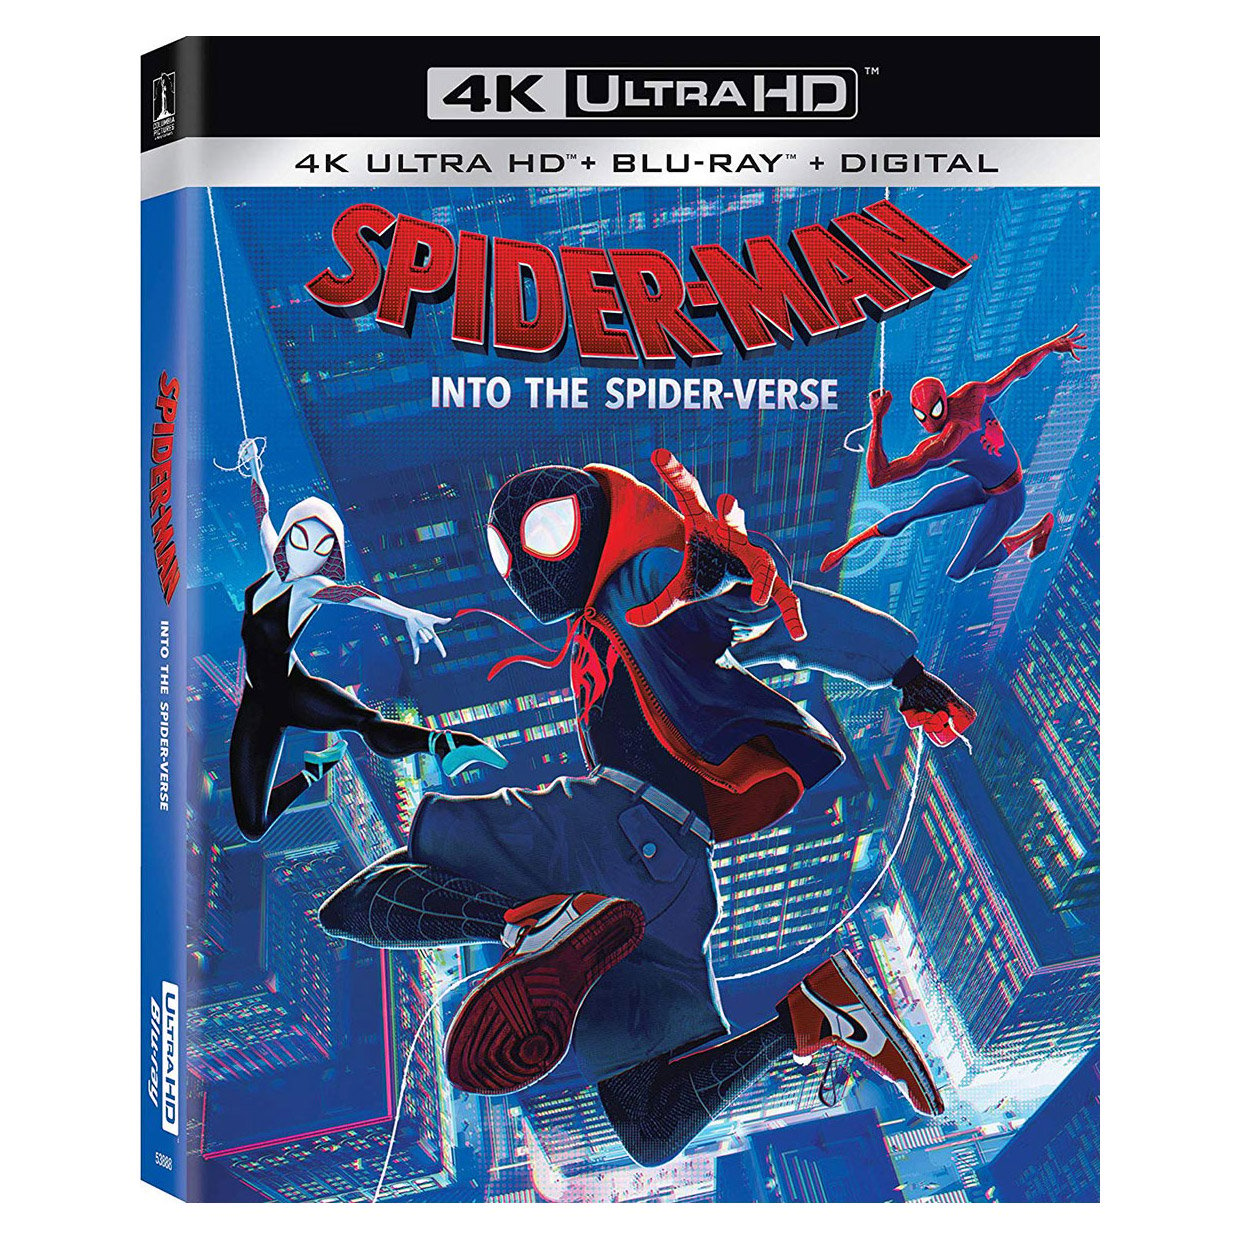 Into the Spider-Verse 4K Blu-ray